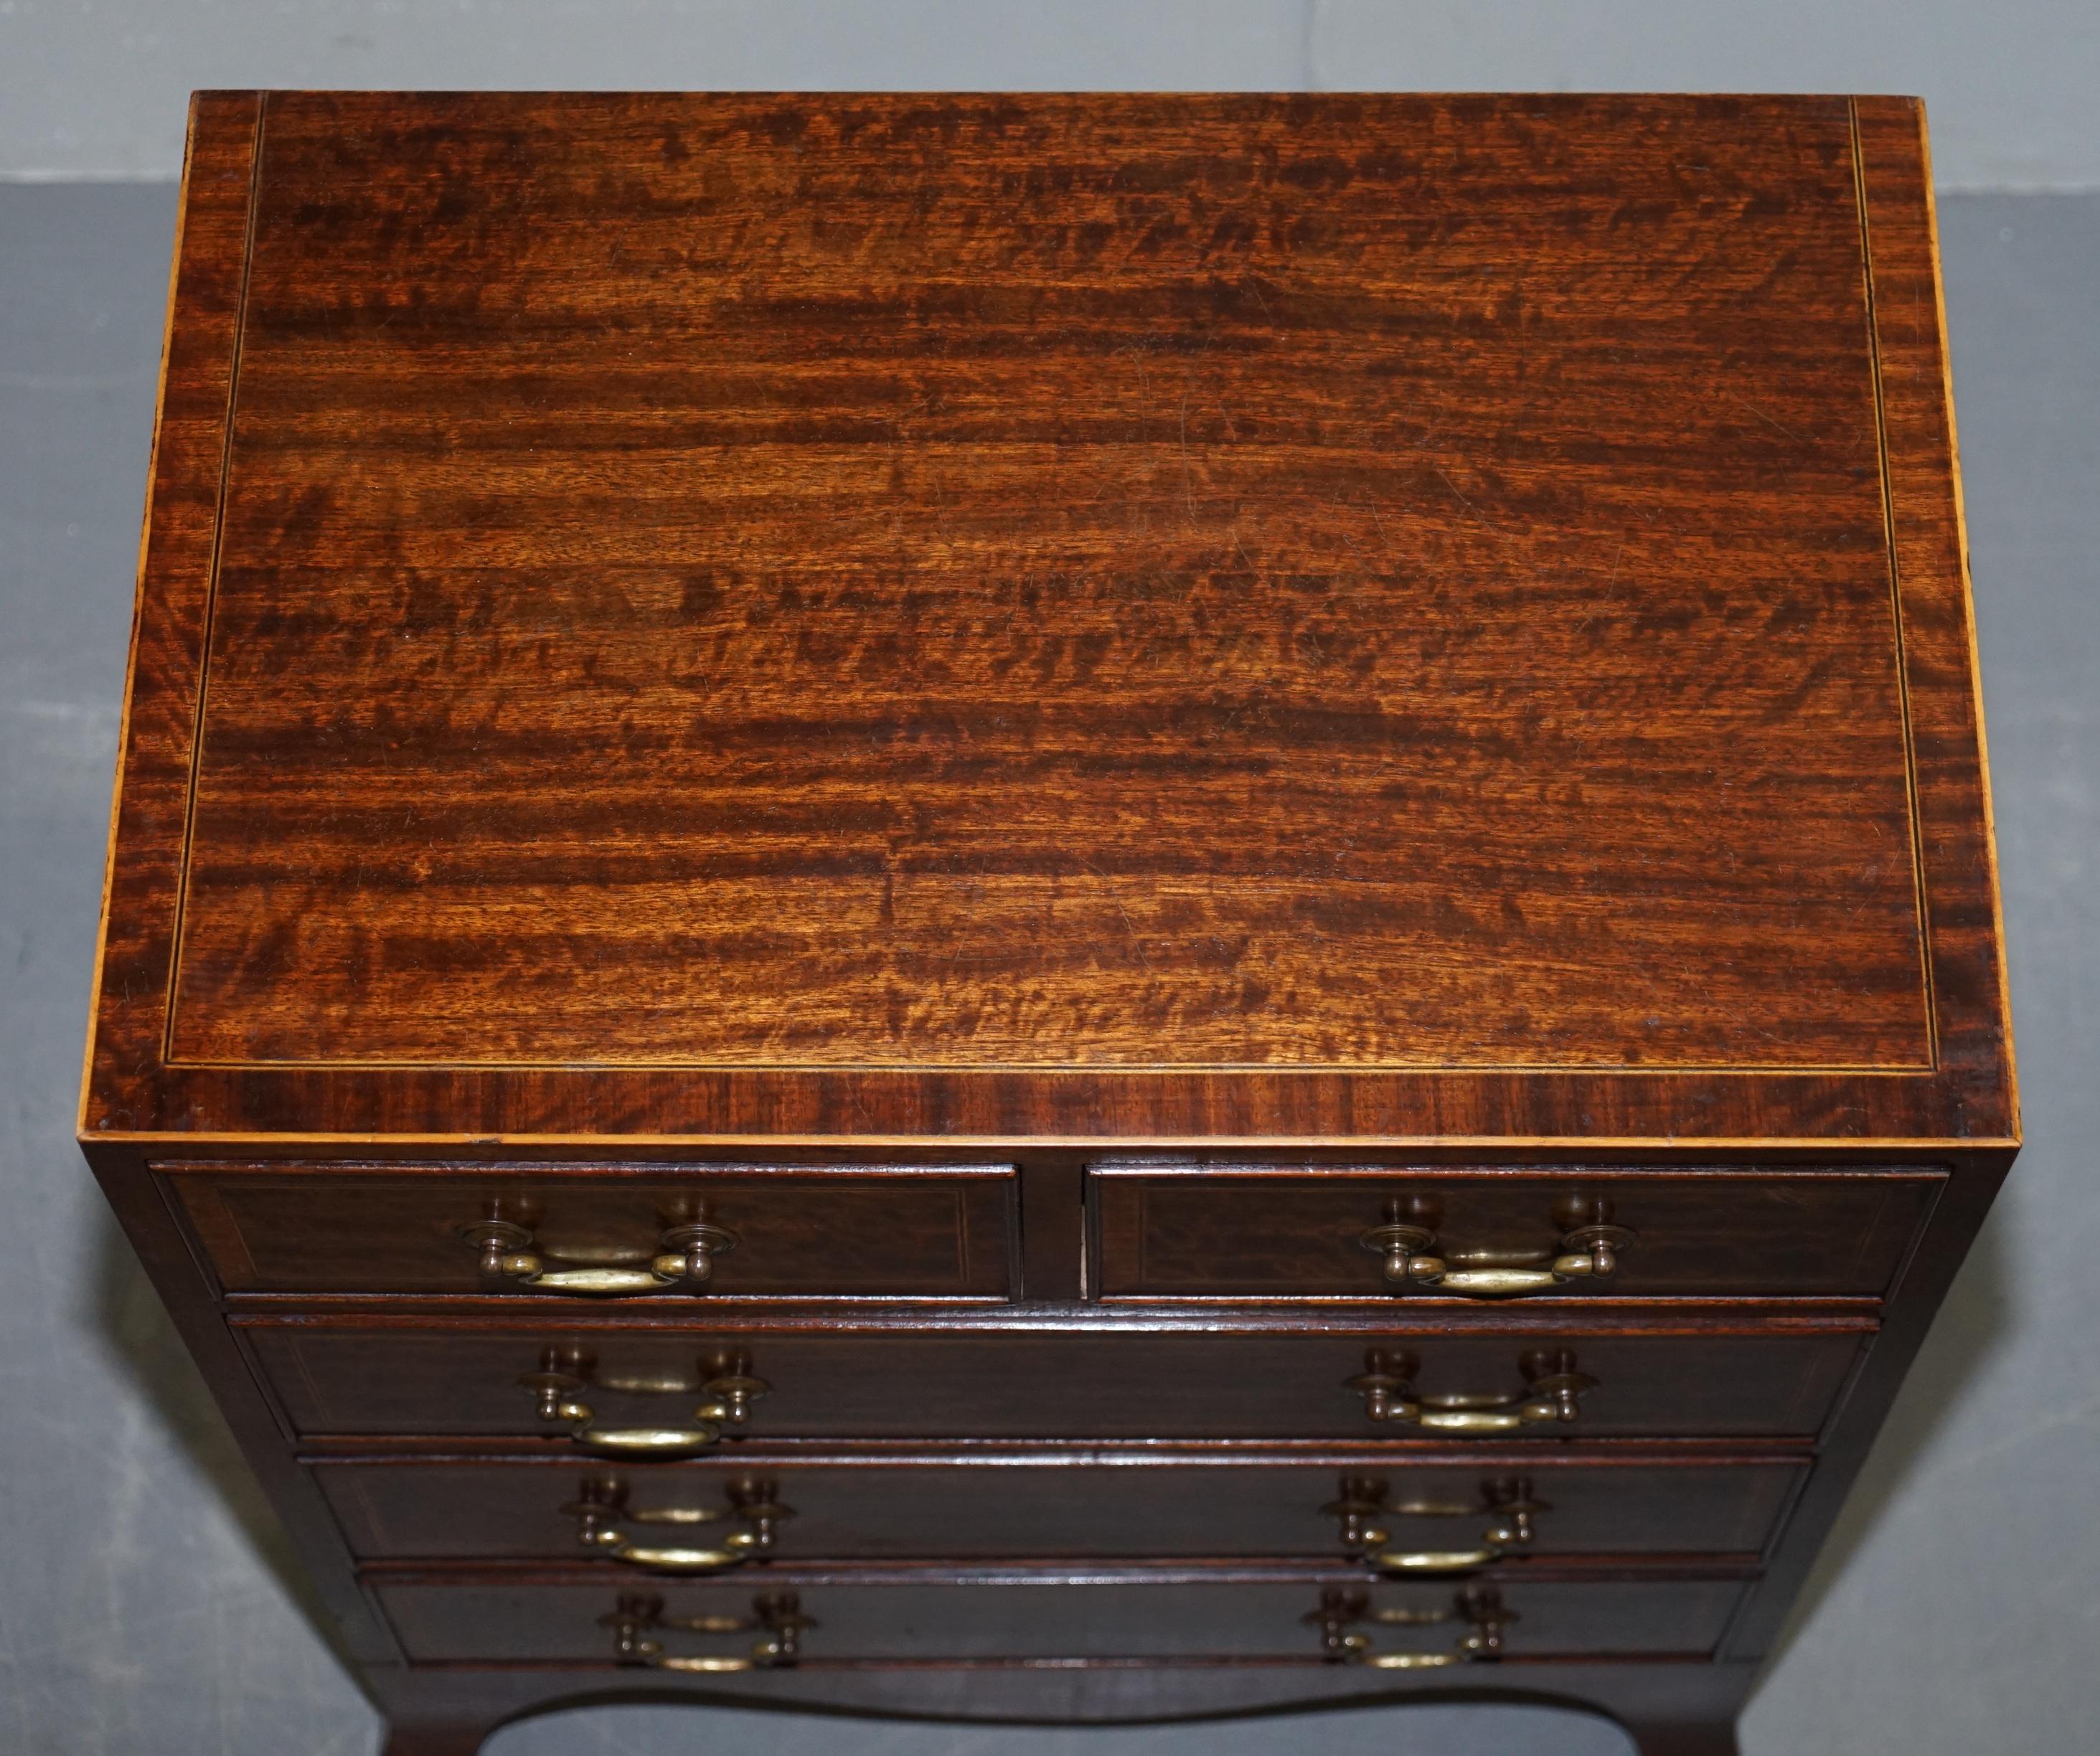 Pair of Stunning Flamed Hardwood Side Table Sized Chests of Drawers Serving Tray 10